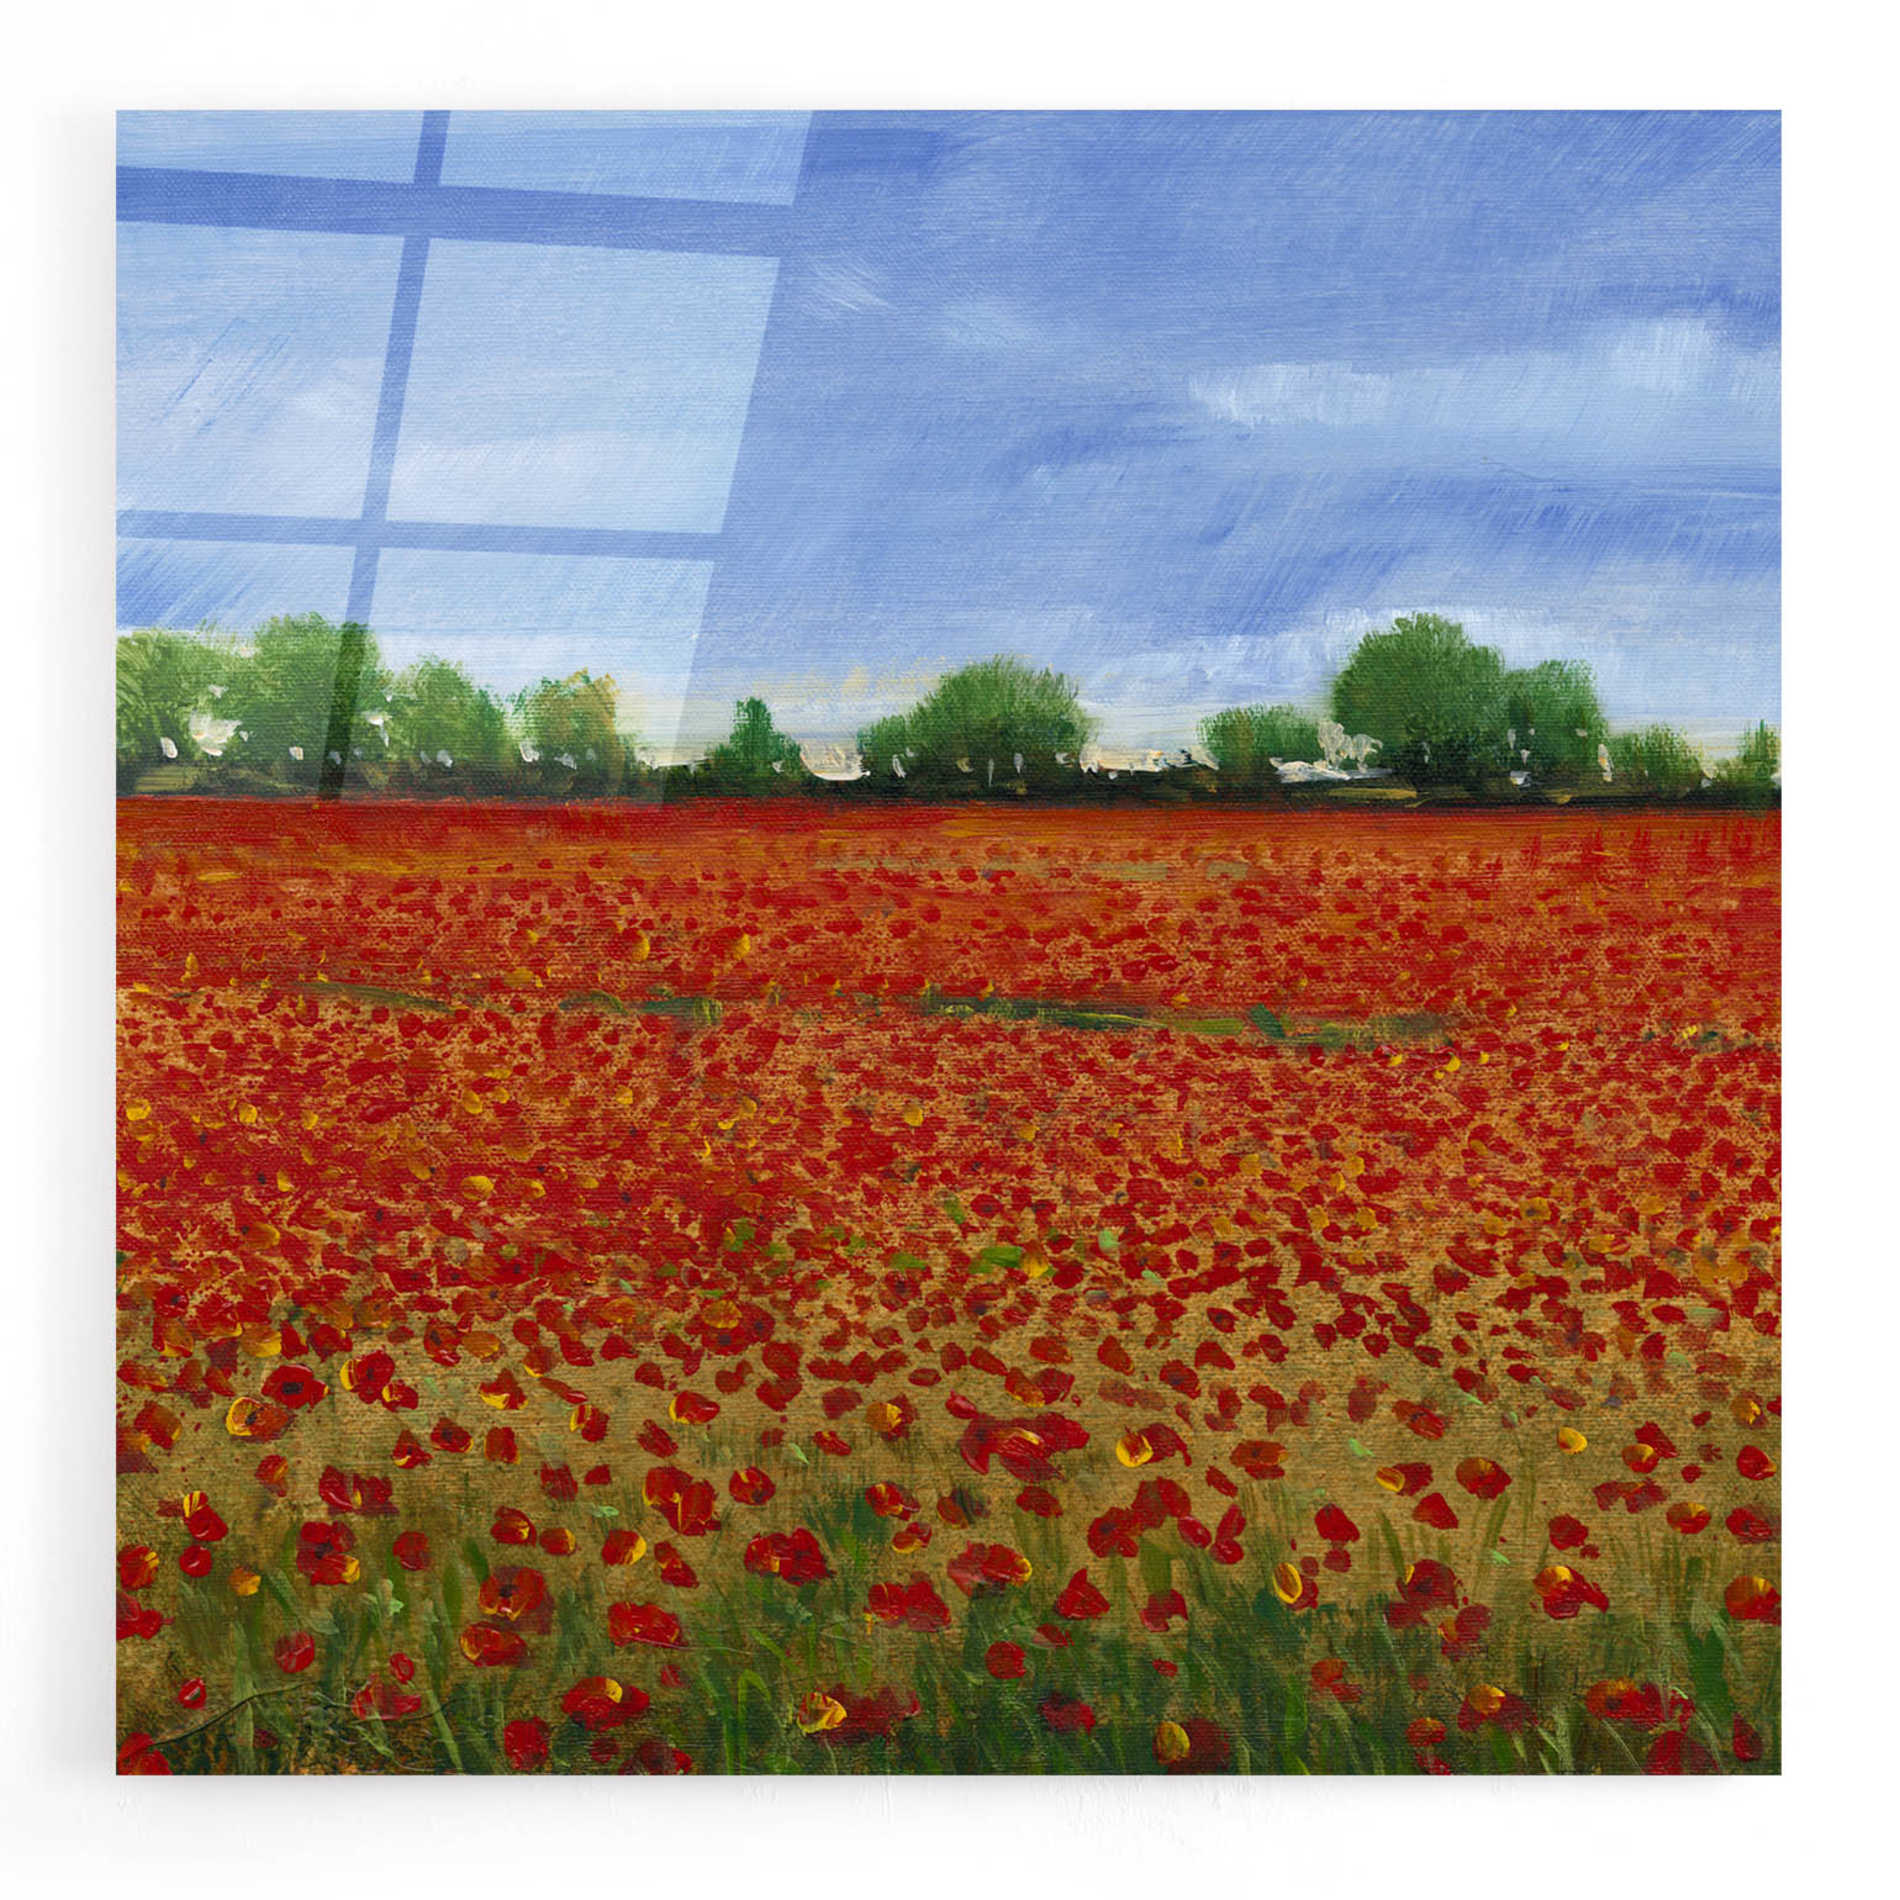 Epic Art 'Field of Poppies I' by Tim O'Toole, Acrylic Glass Wall Art,24x24